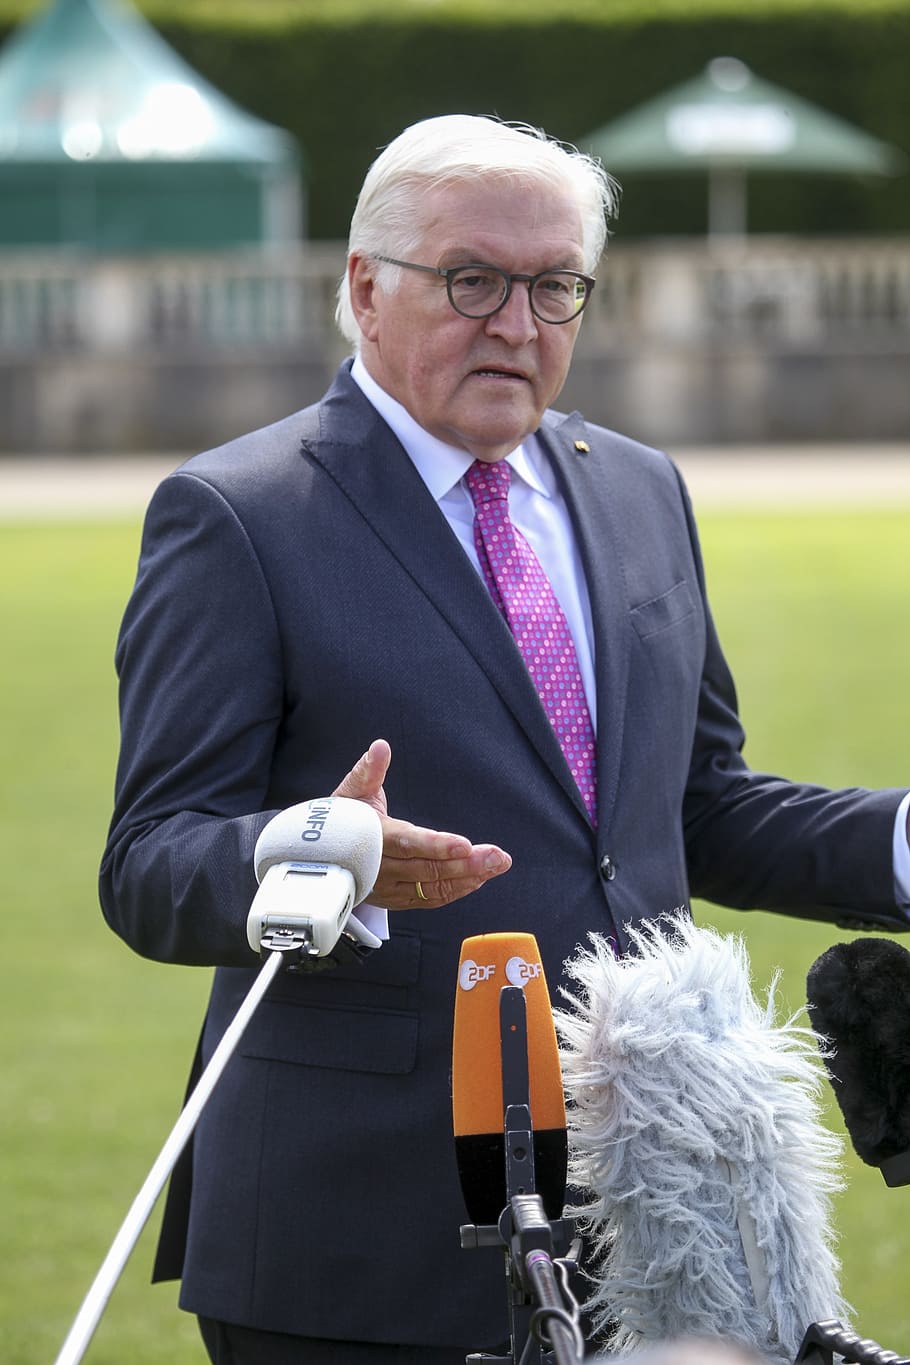 federal president, frank-walter steinmeier, federal republic of germany, head of state, president, politician, policy, senior Adult, men, outdoors